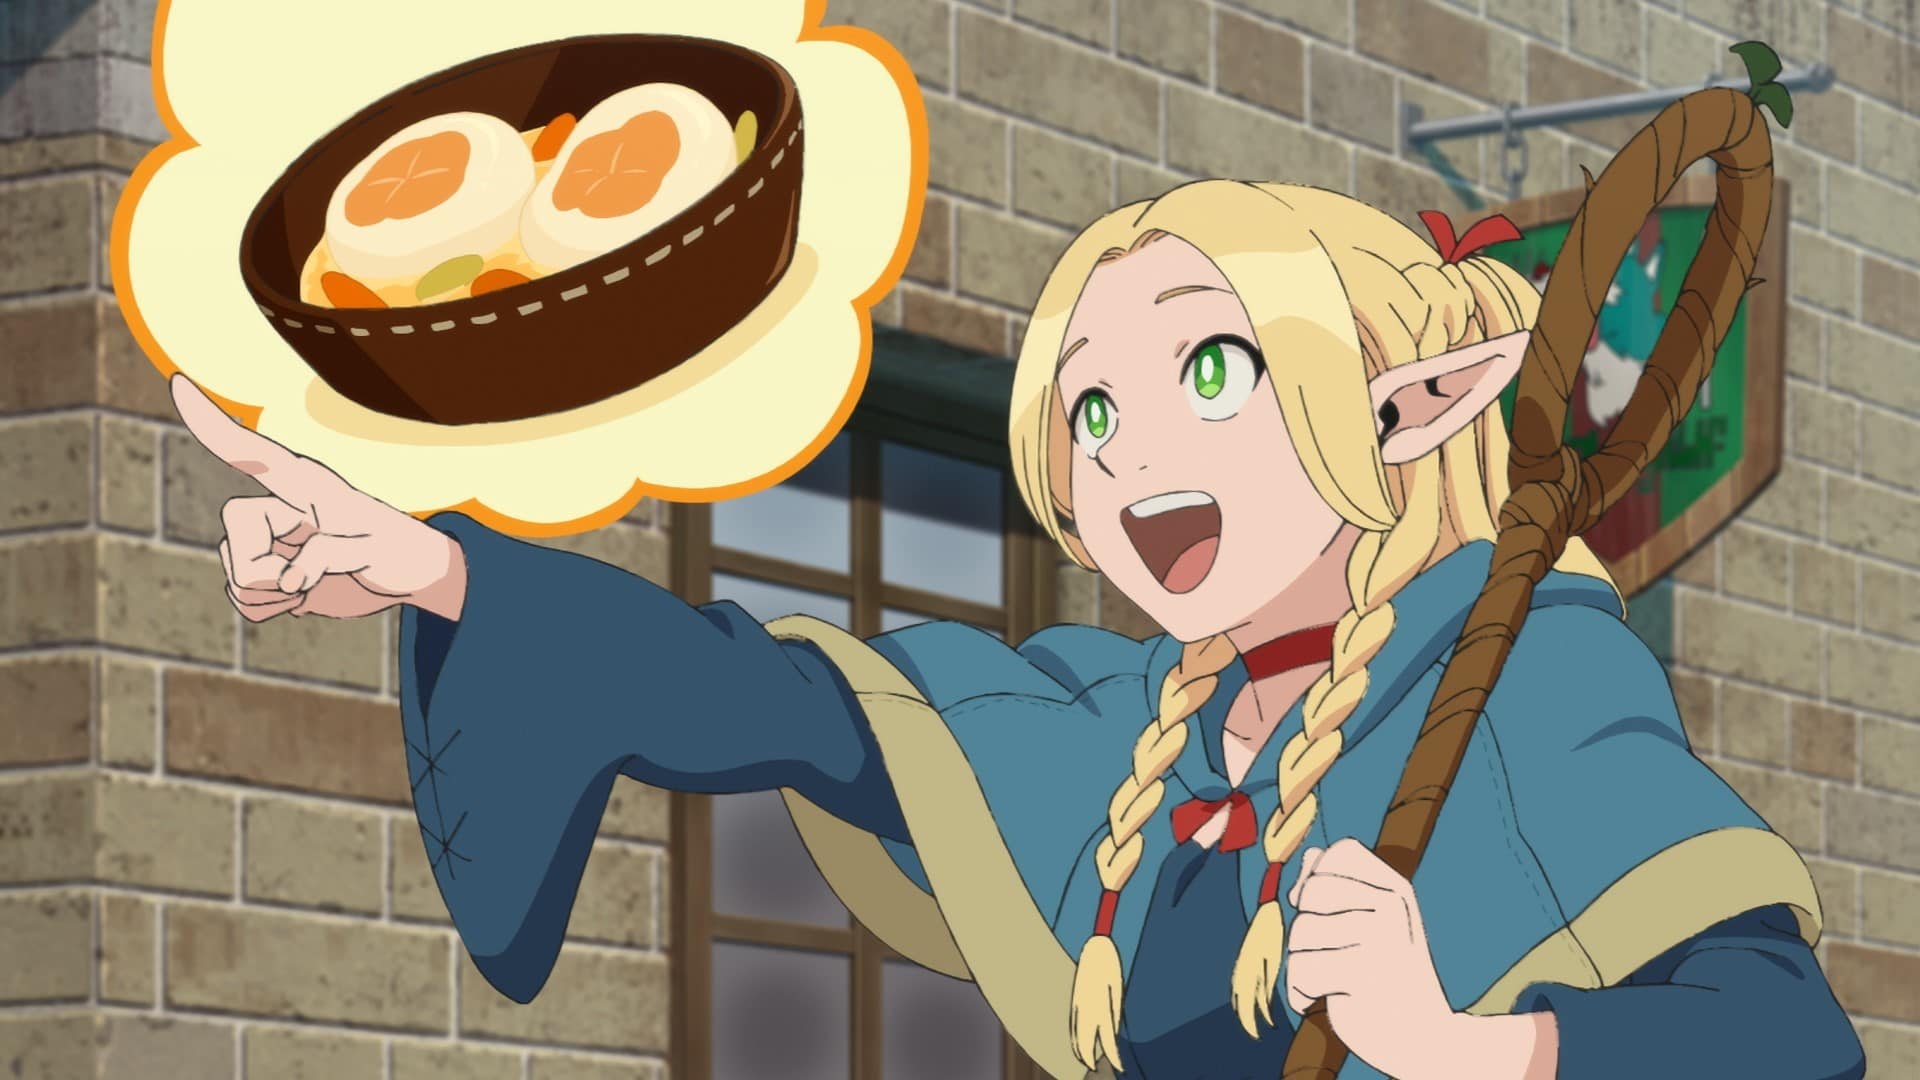 Delicious in Dungeon Episode 1 Expectations